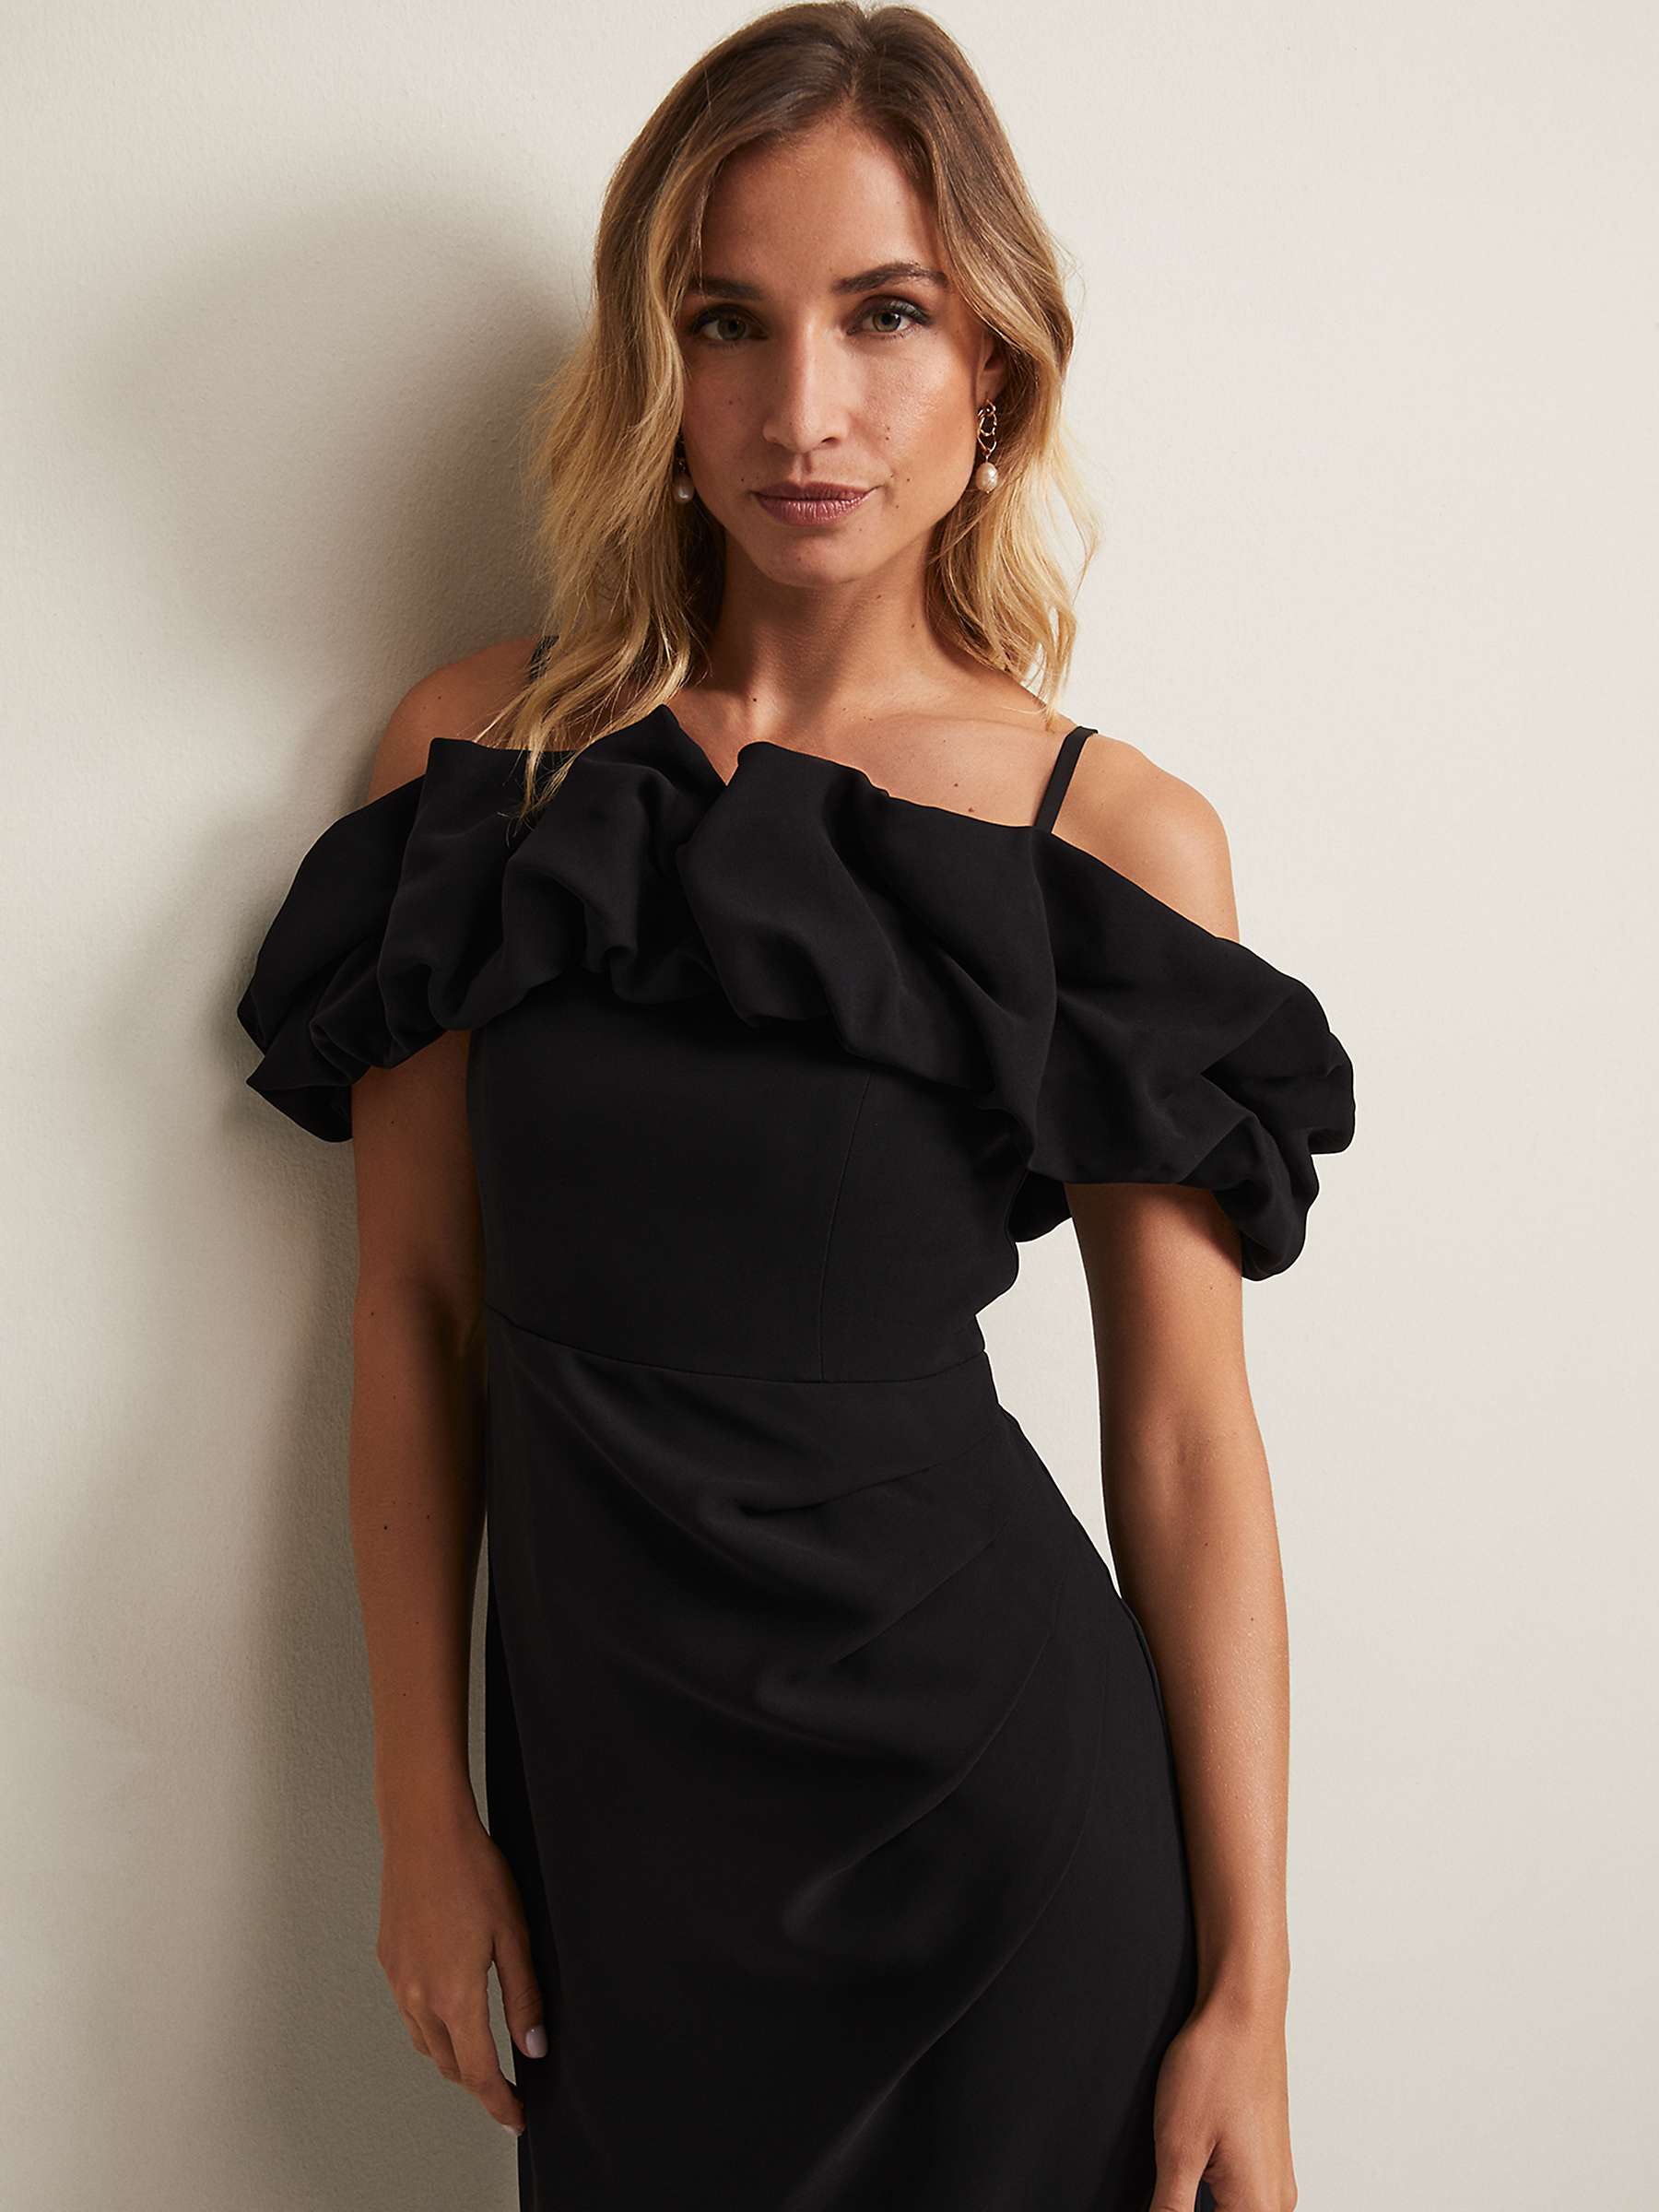 Buy Phase Eight Mallory Off The Shoulder Maxi Dress, Black Online at johnlewis.com